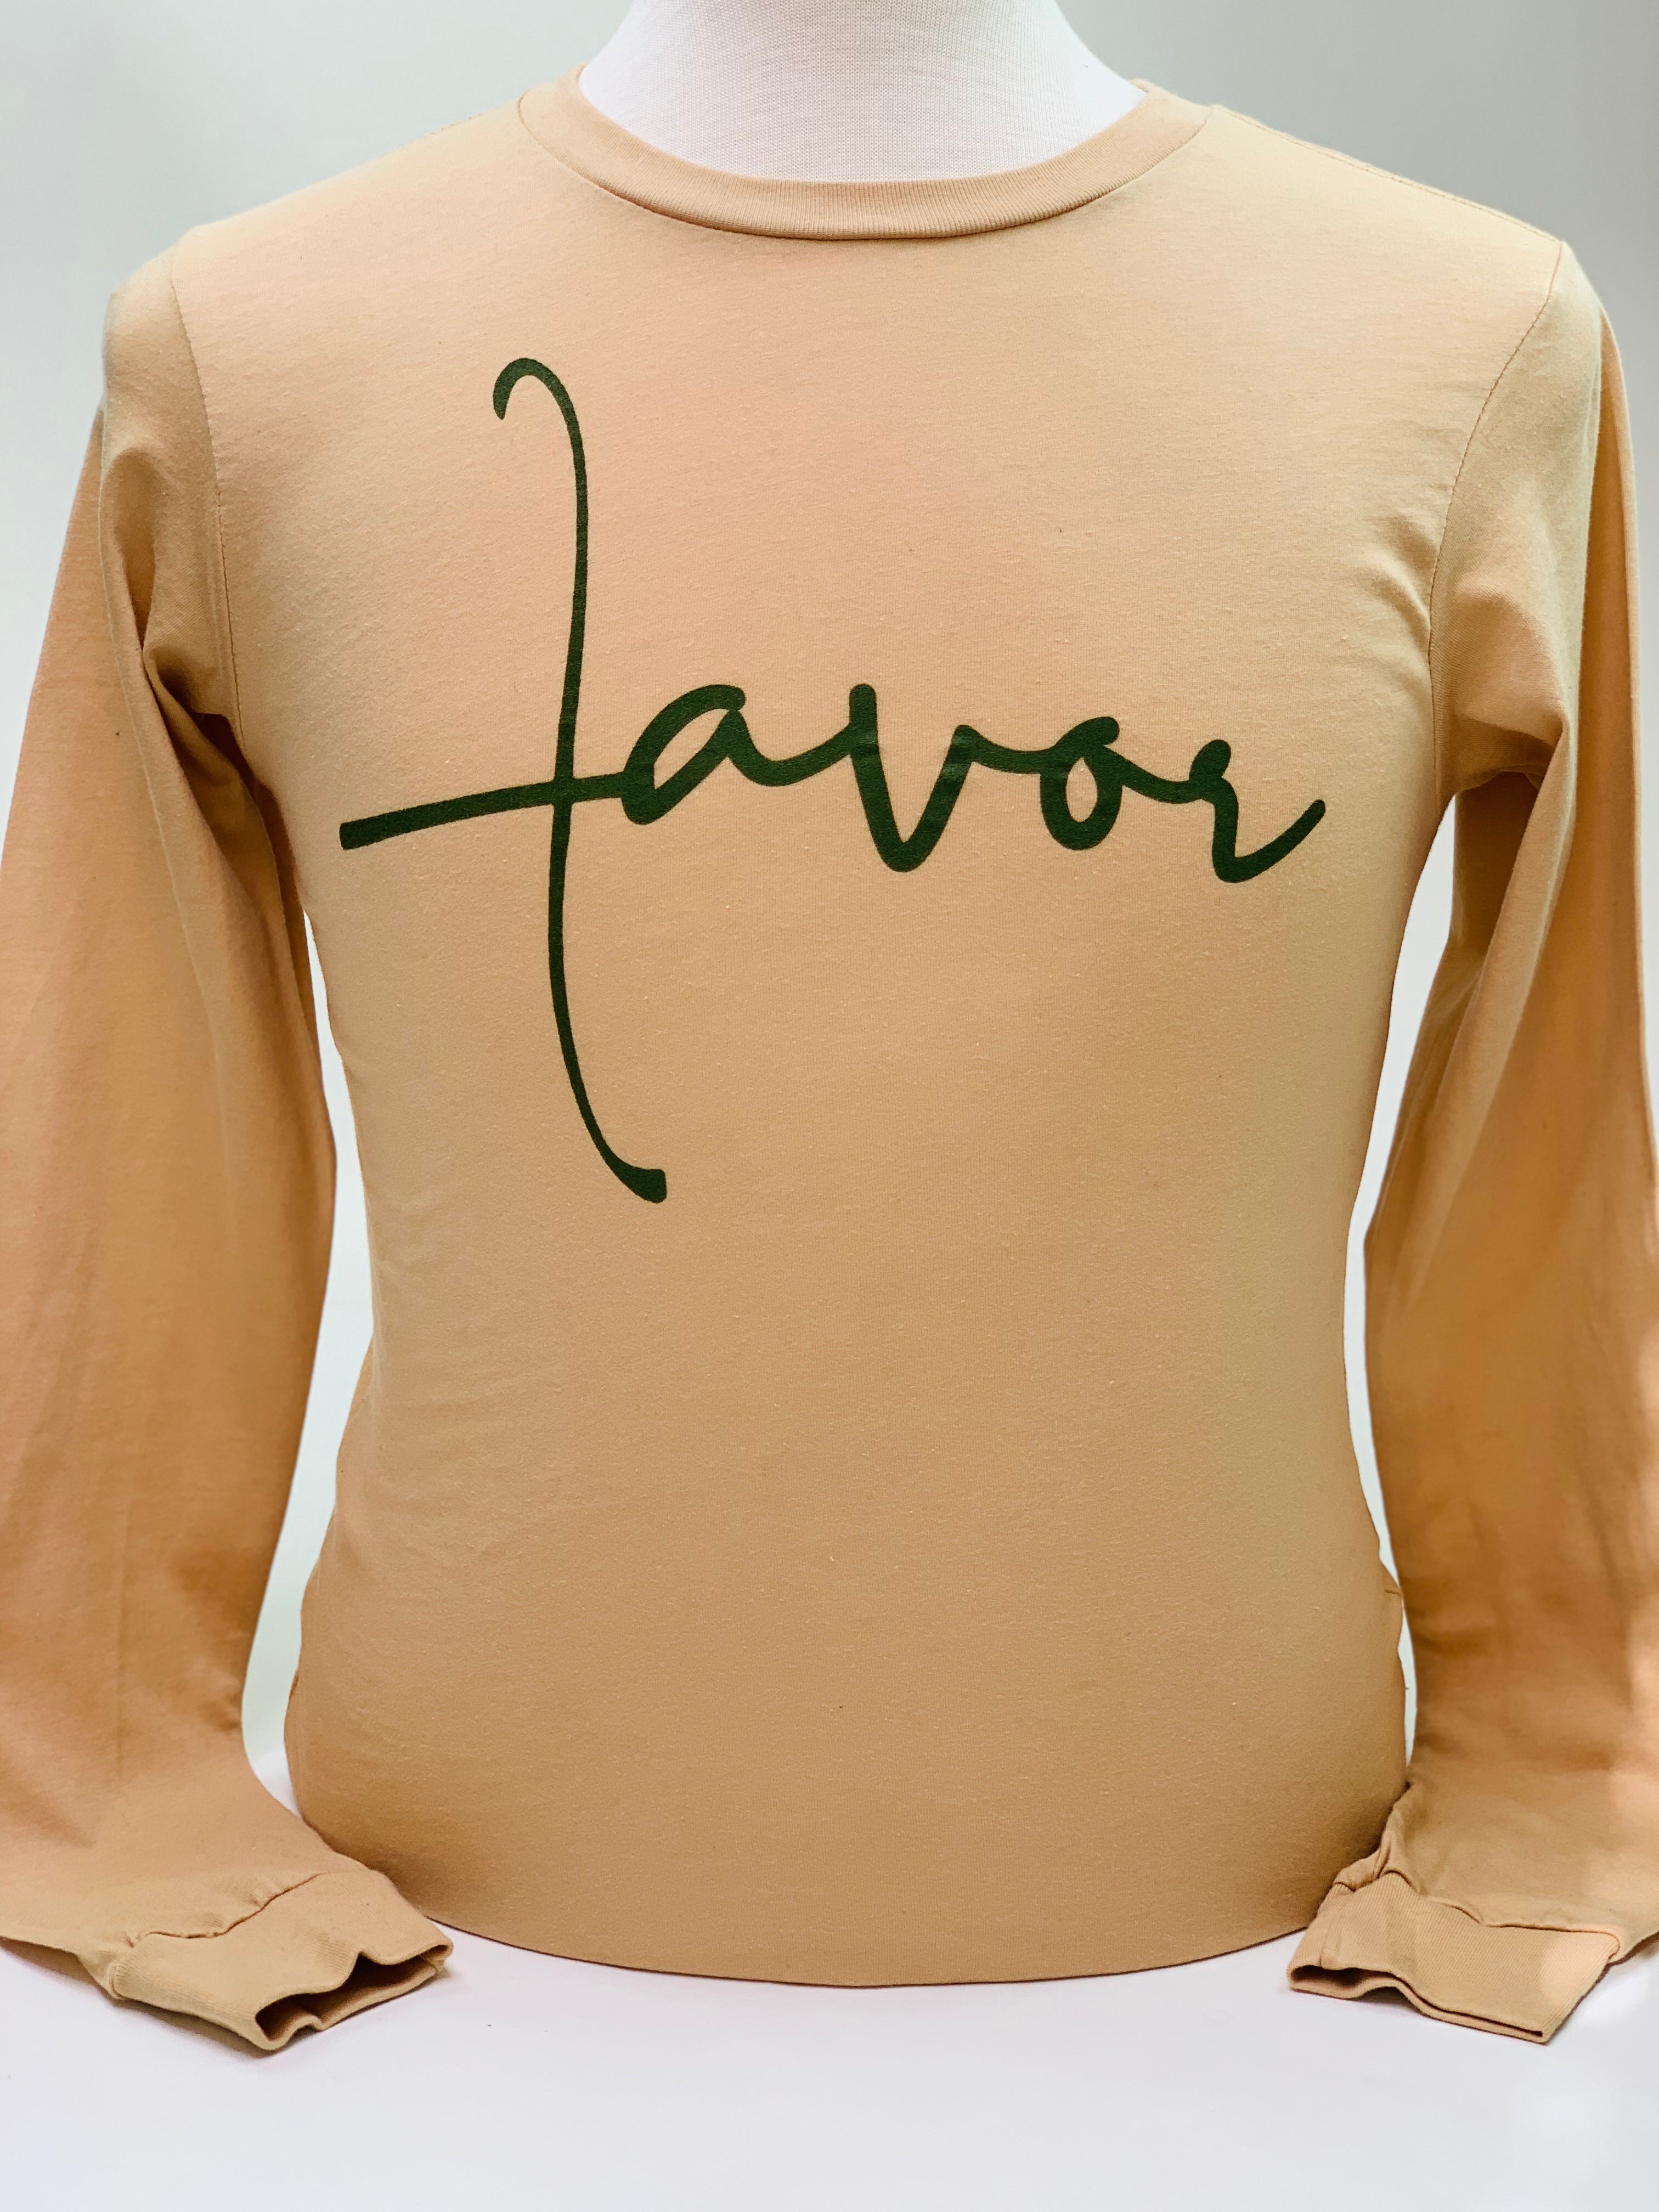 Favor Long-Sleeve Shirt Khaki & Green - Jewellery Unique Gifts & Accessories